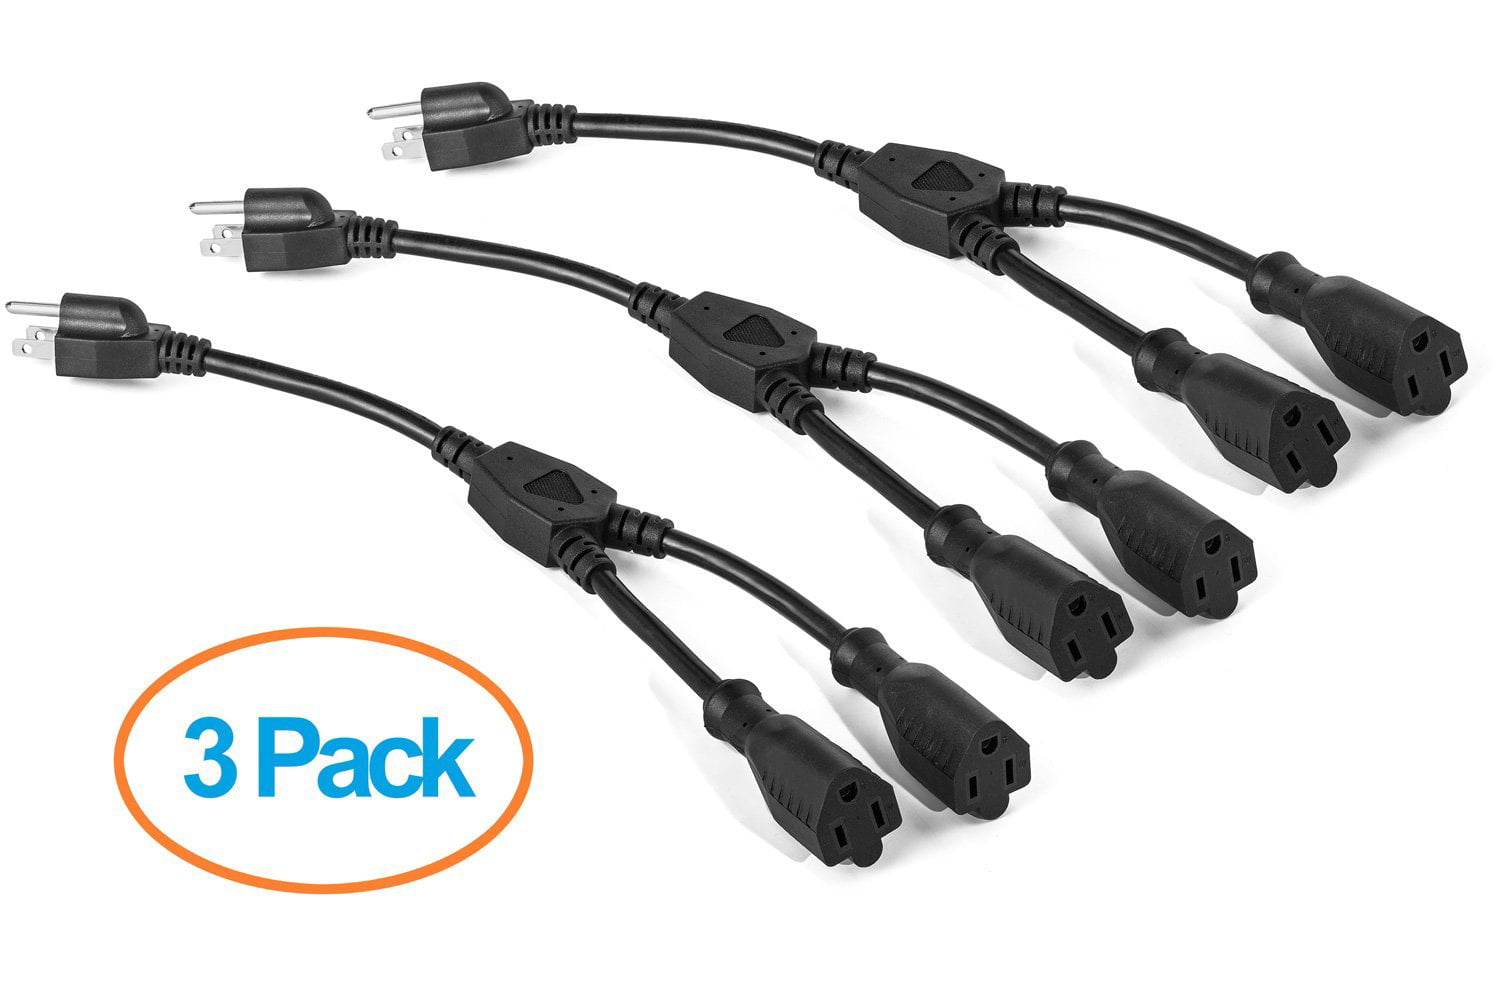 UL Approved 1 Foot Power Cord Splitter ClearMax 3 Prong Y Splitter Cable Power Extension Cord Cable Strip Outlet Saver 3 Pack | Black 16AWG 